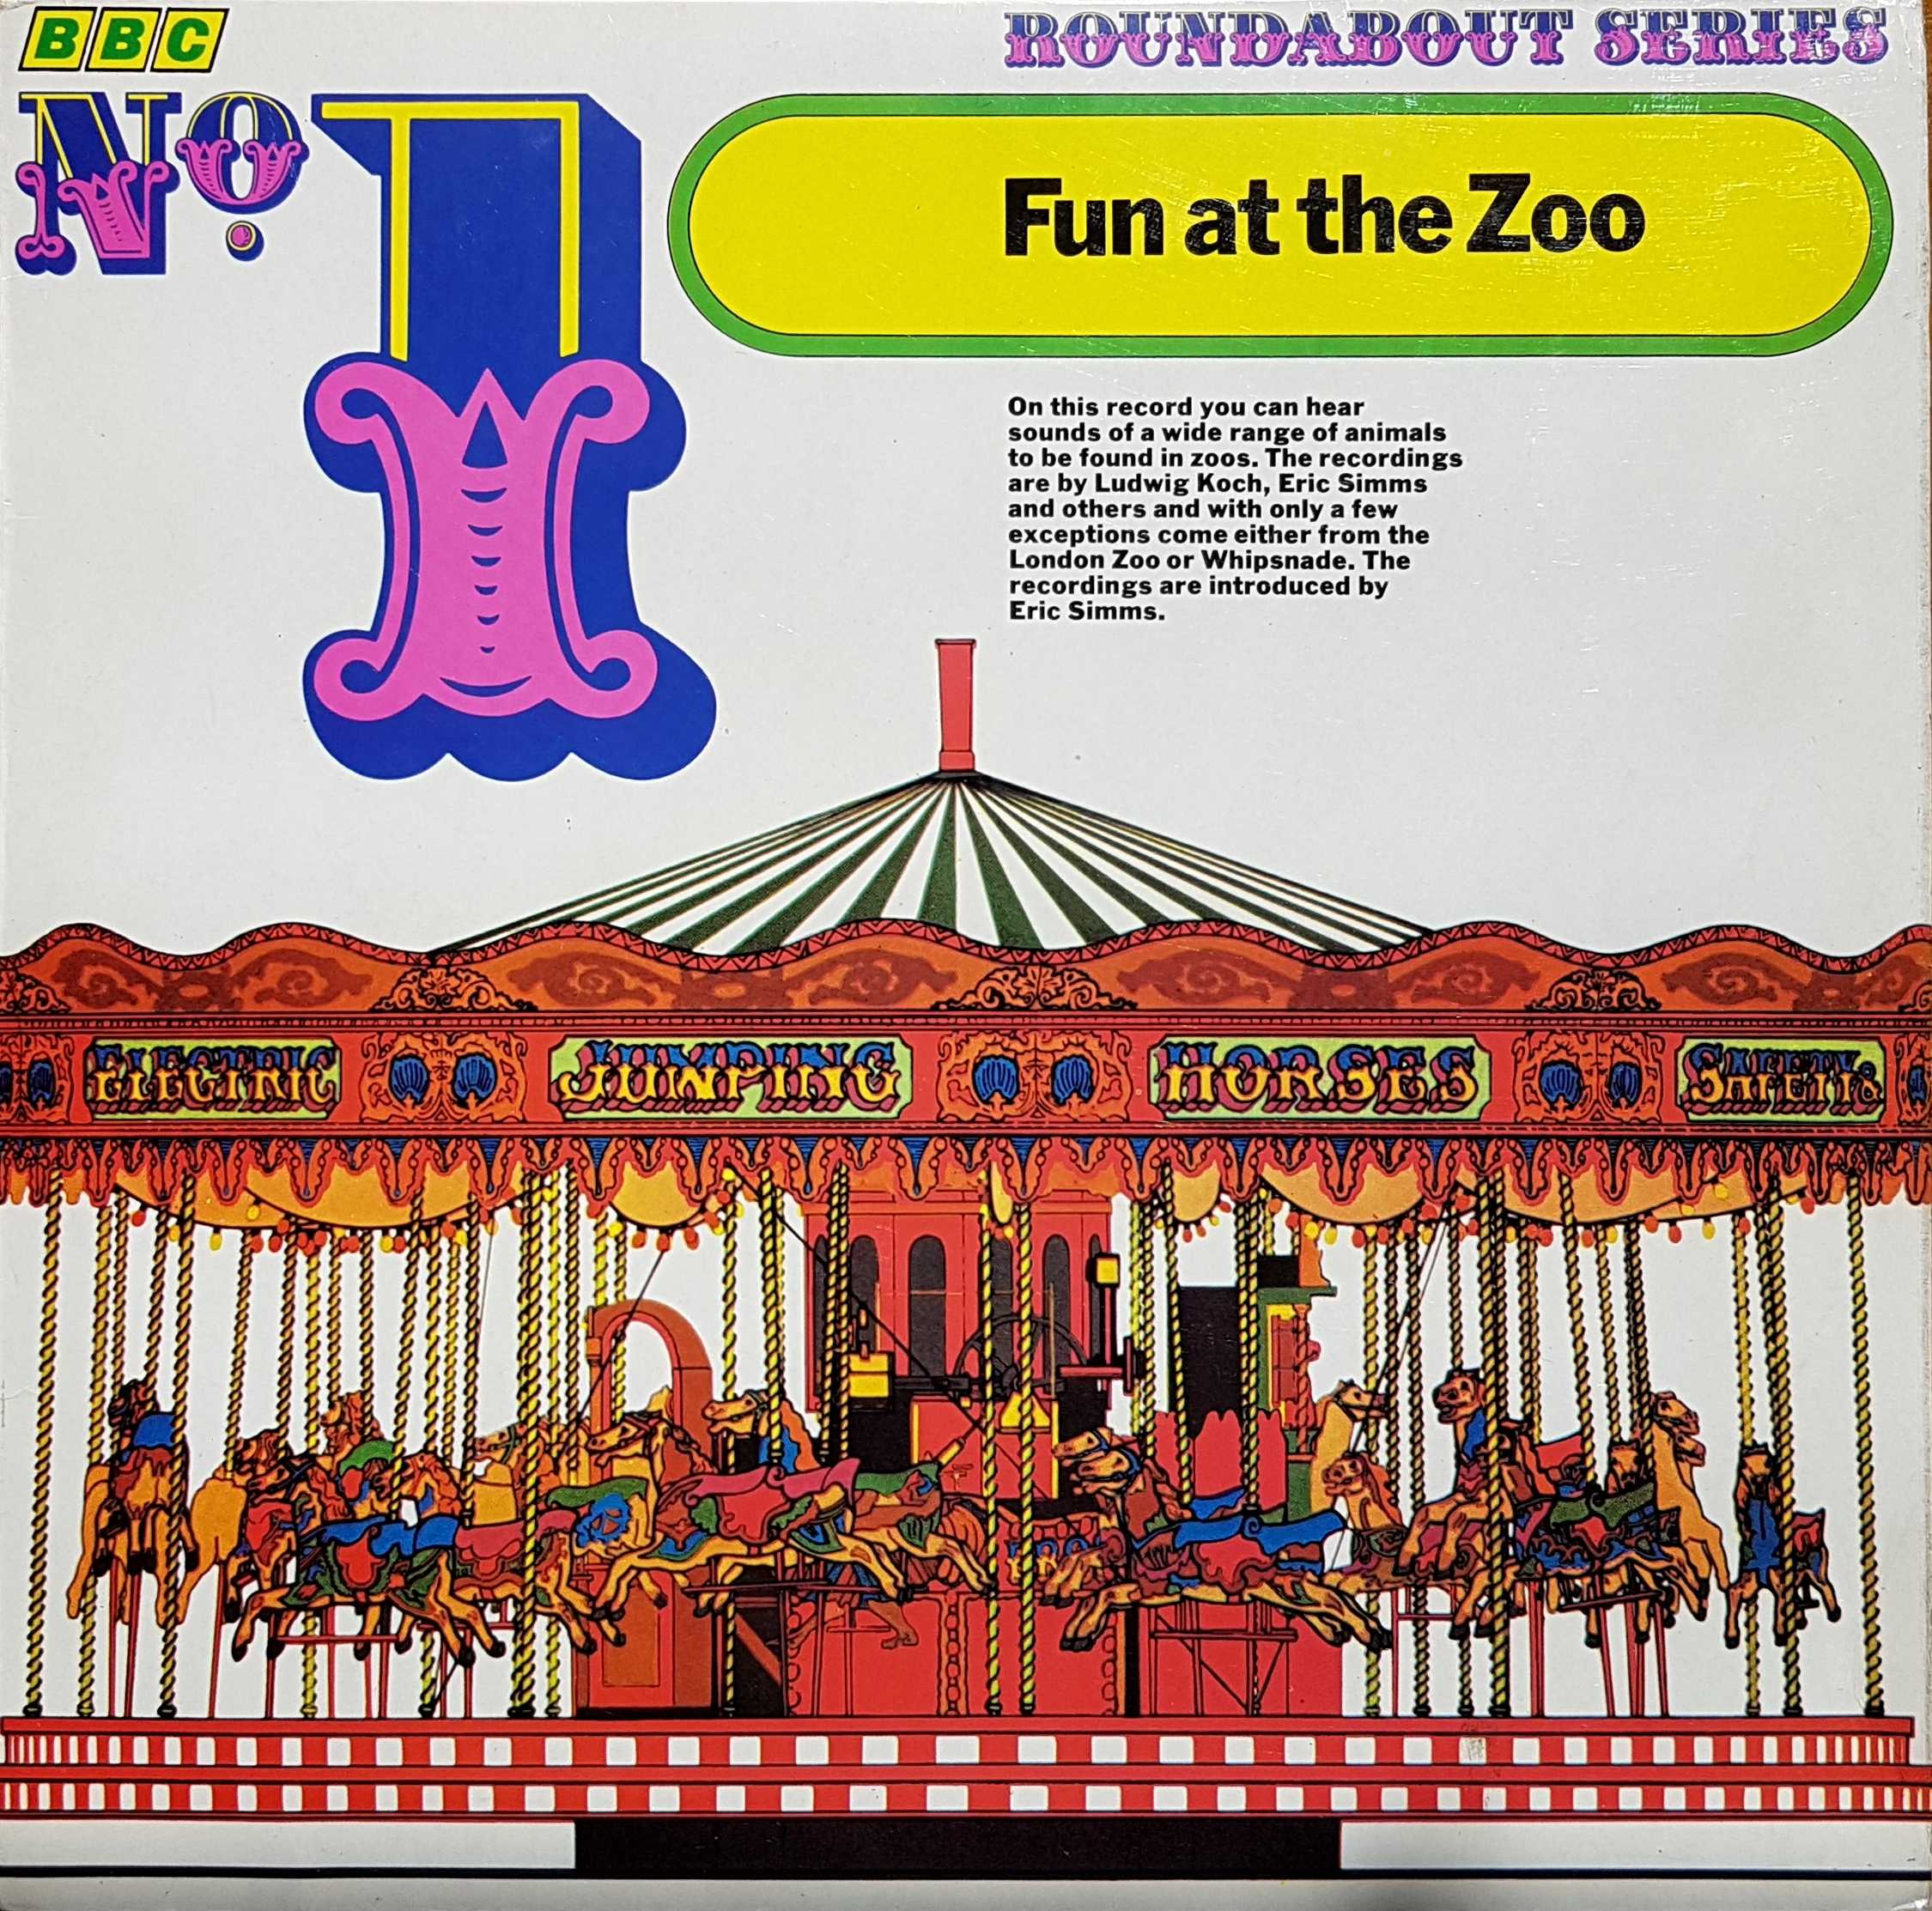 Picture of Fun at the zoo- Sound effects by artist Various from the BBC albums - Records and Tapes library